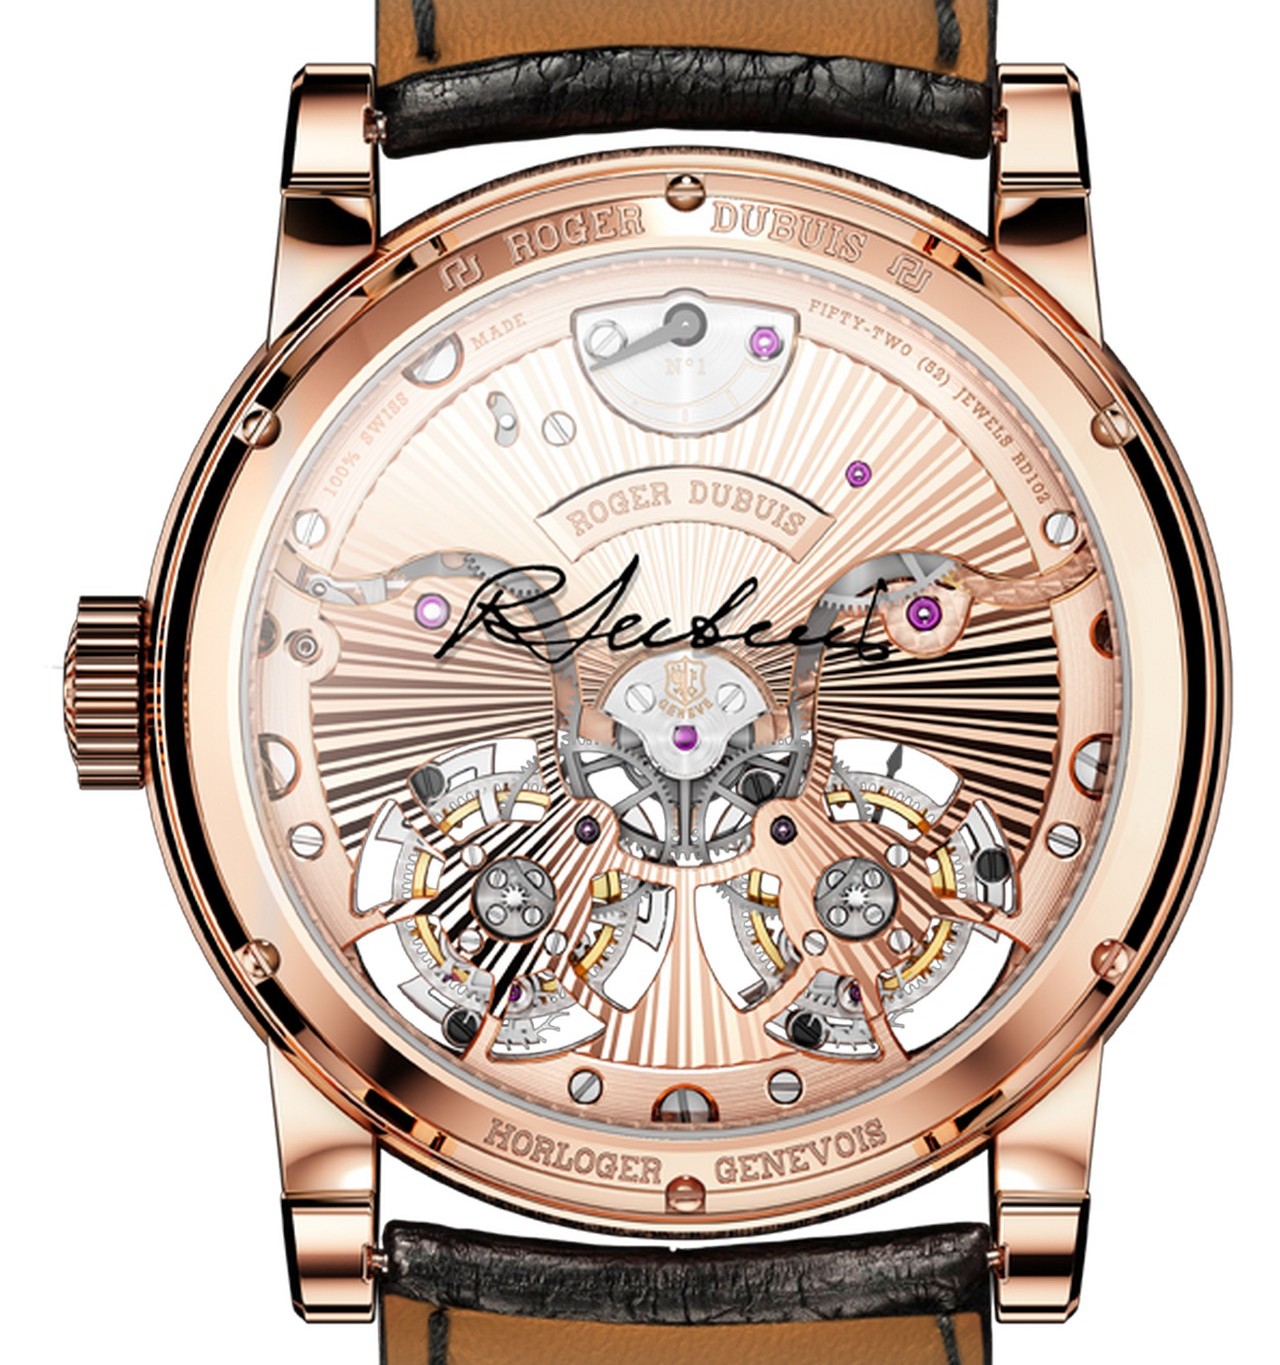 RDDBHO0571 Roger Dubuis Hommage Collection